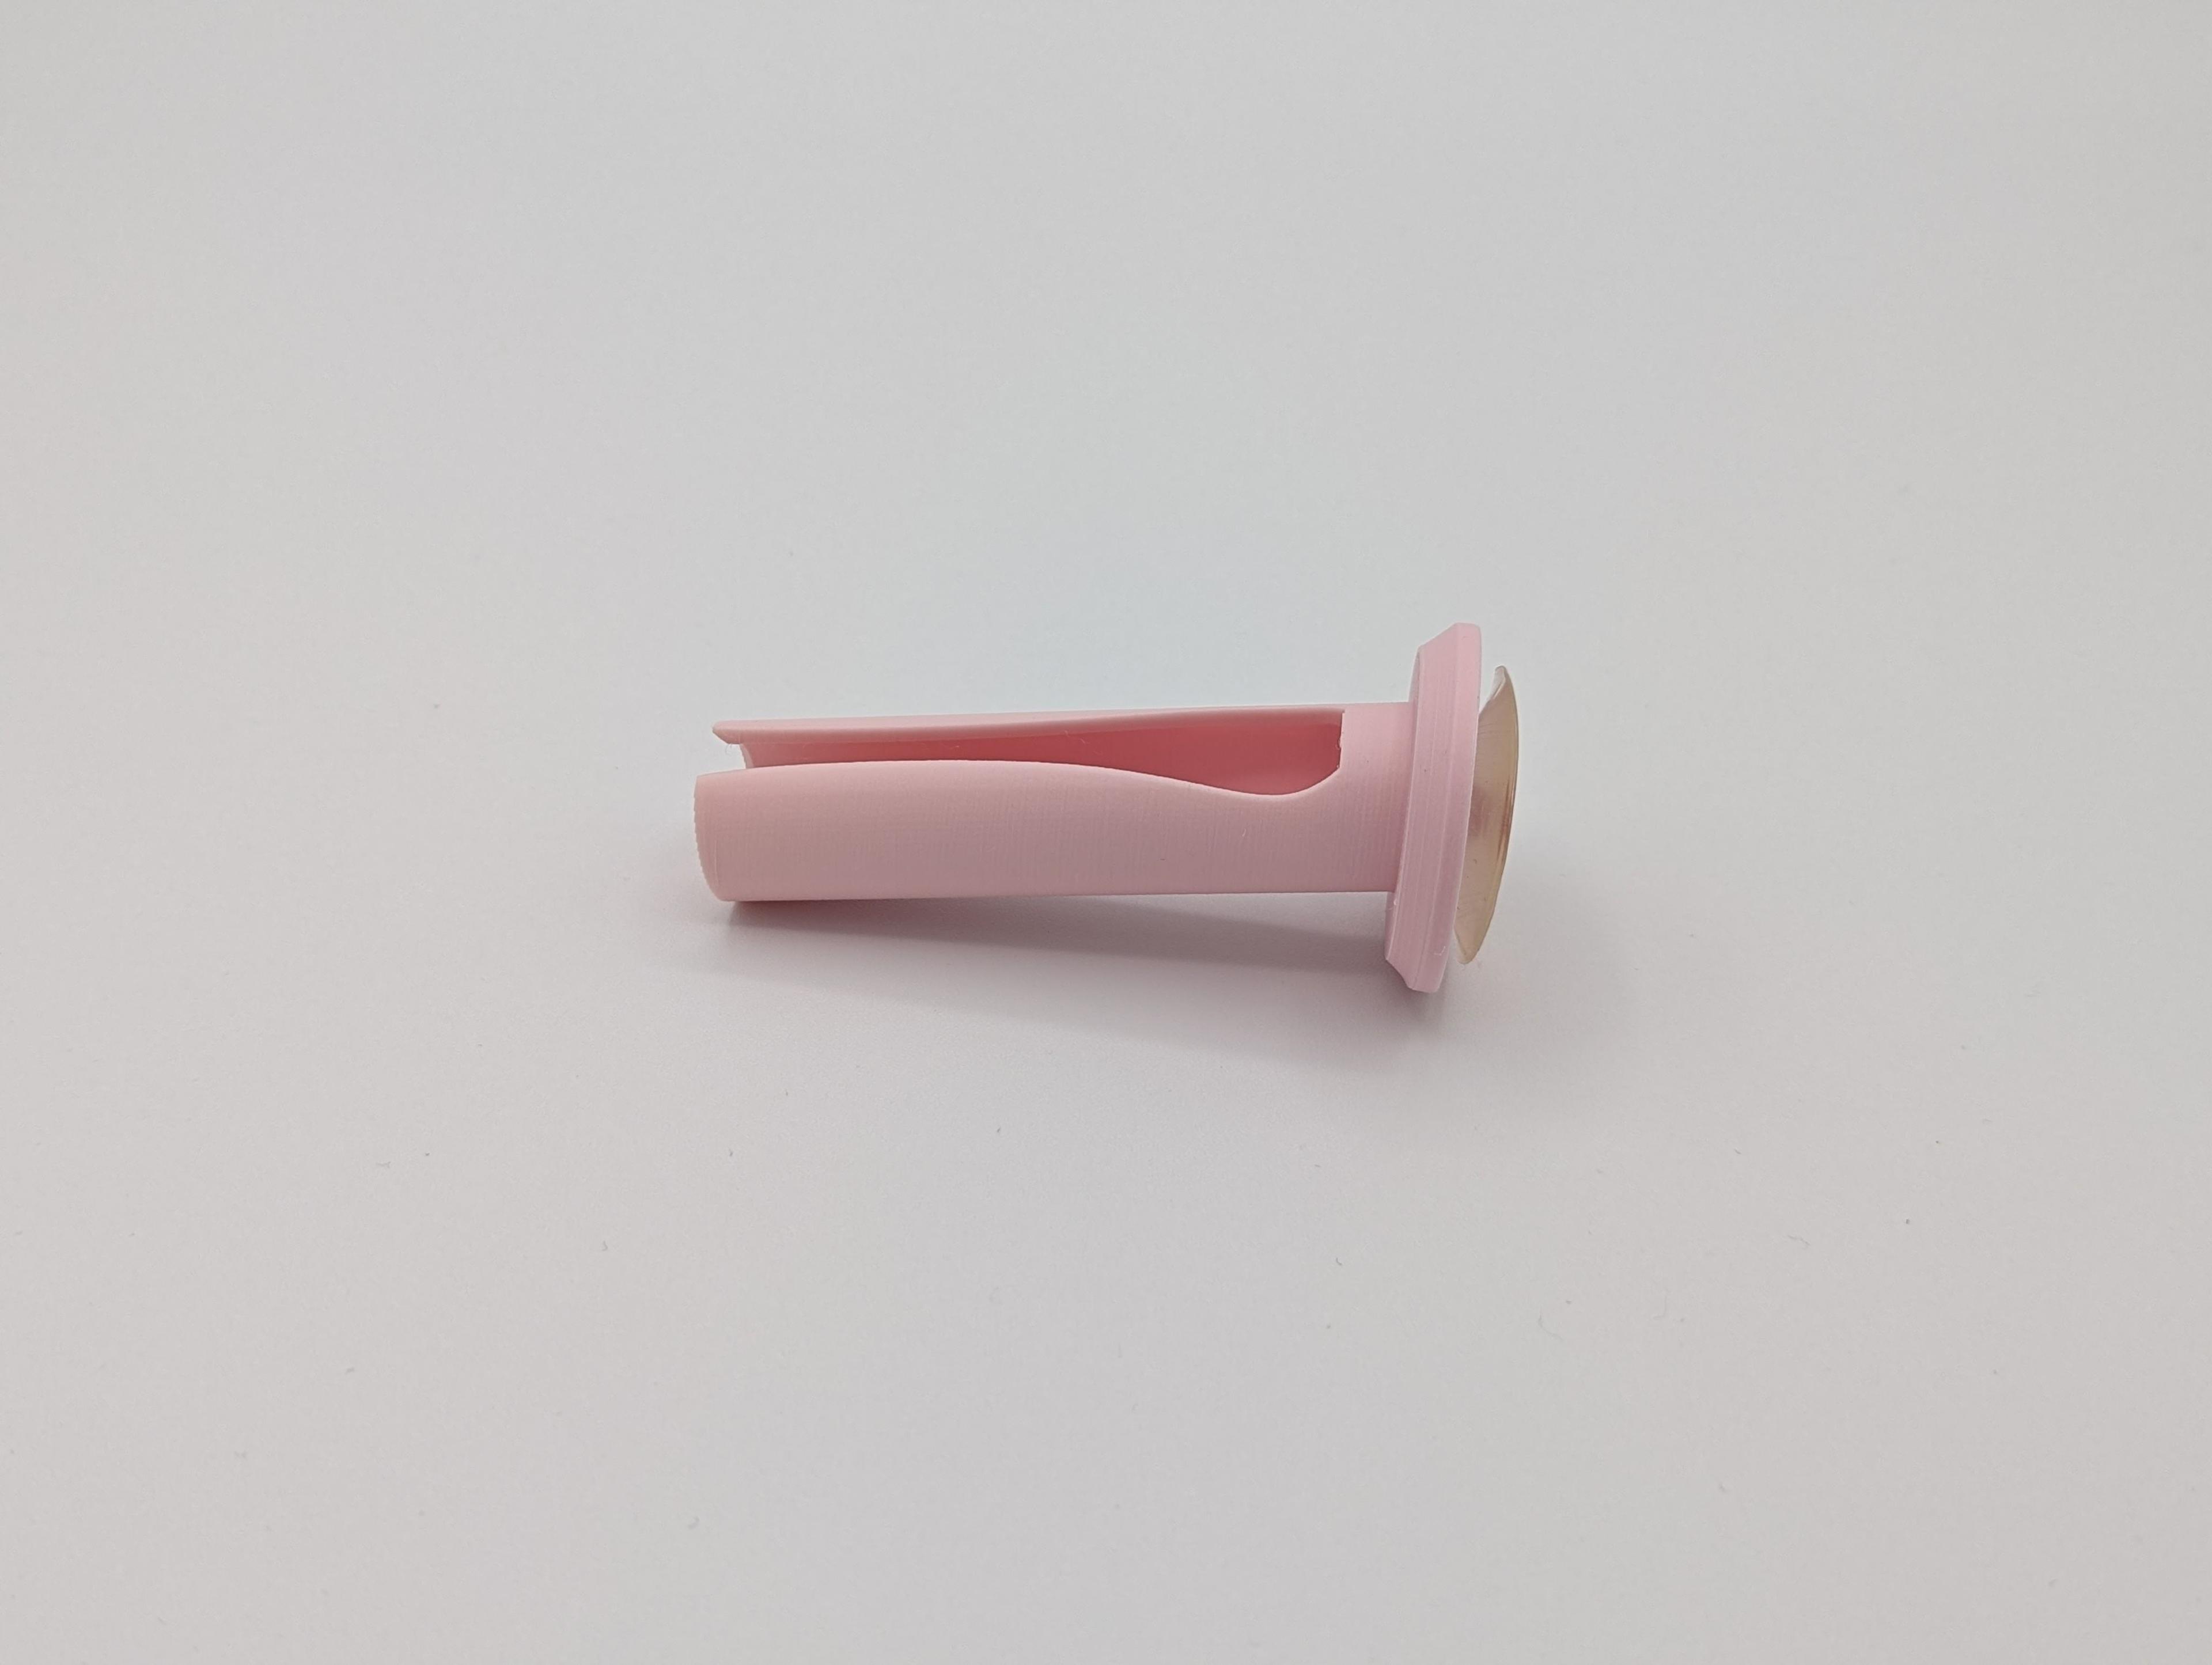 Quip toothbrush stand - suction cup.step 3d model